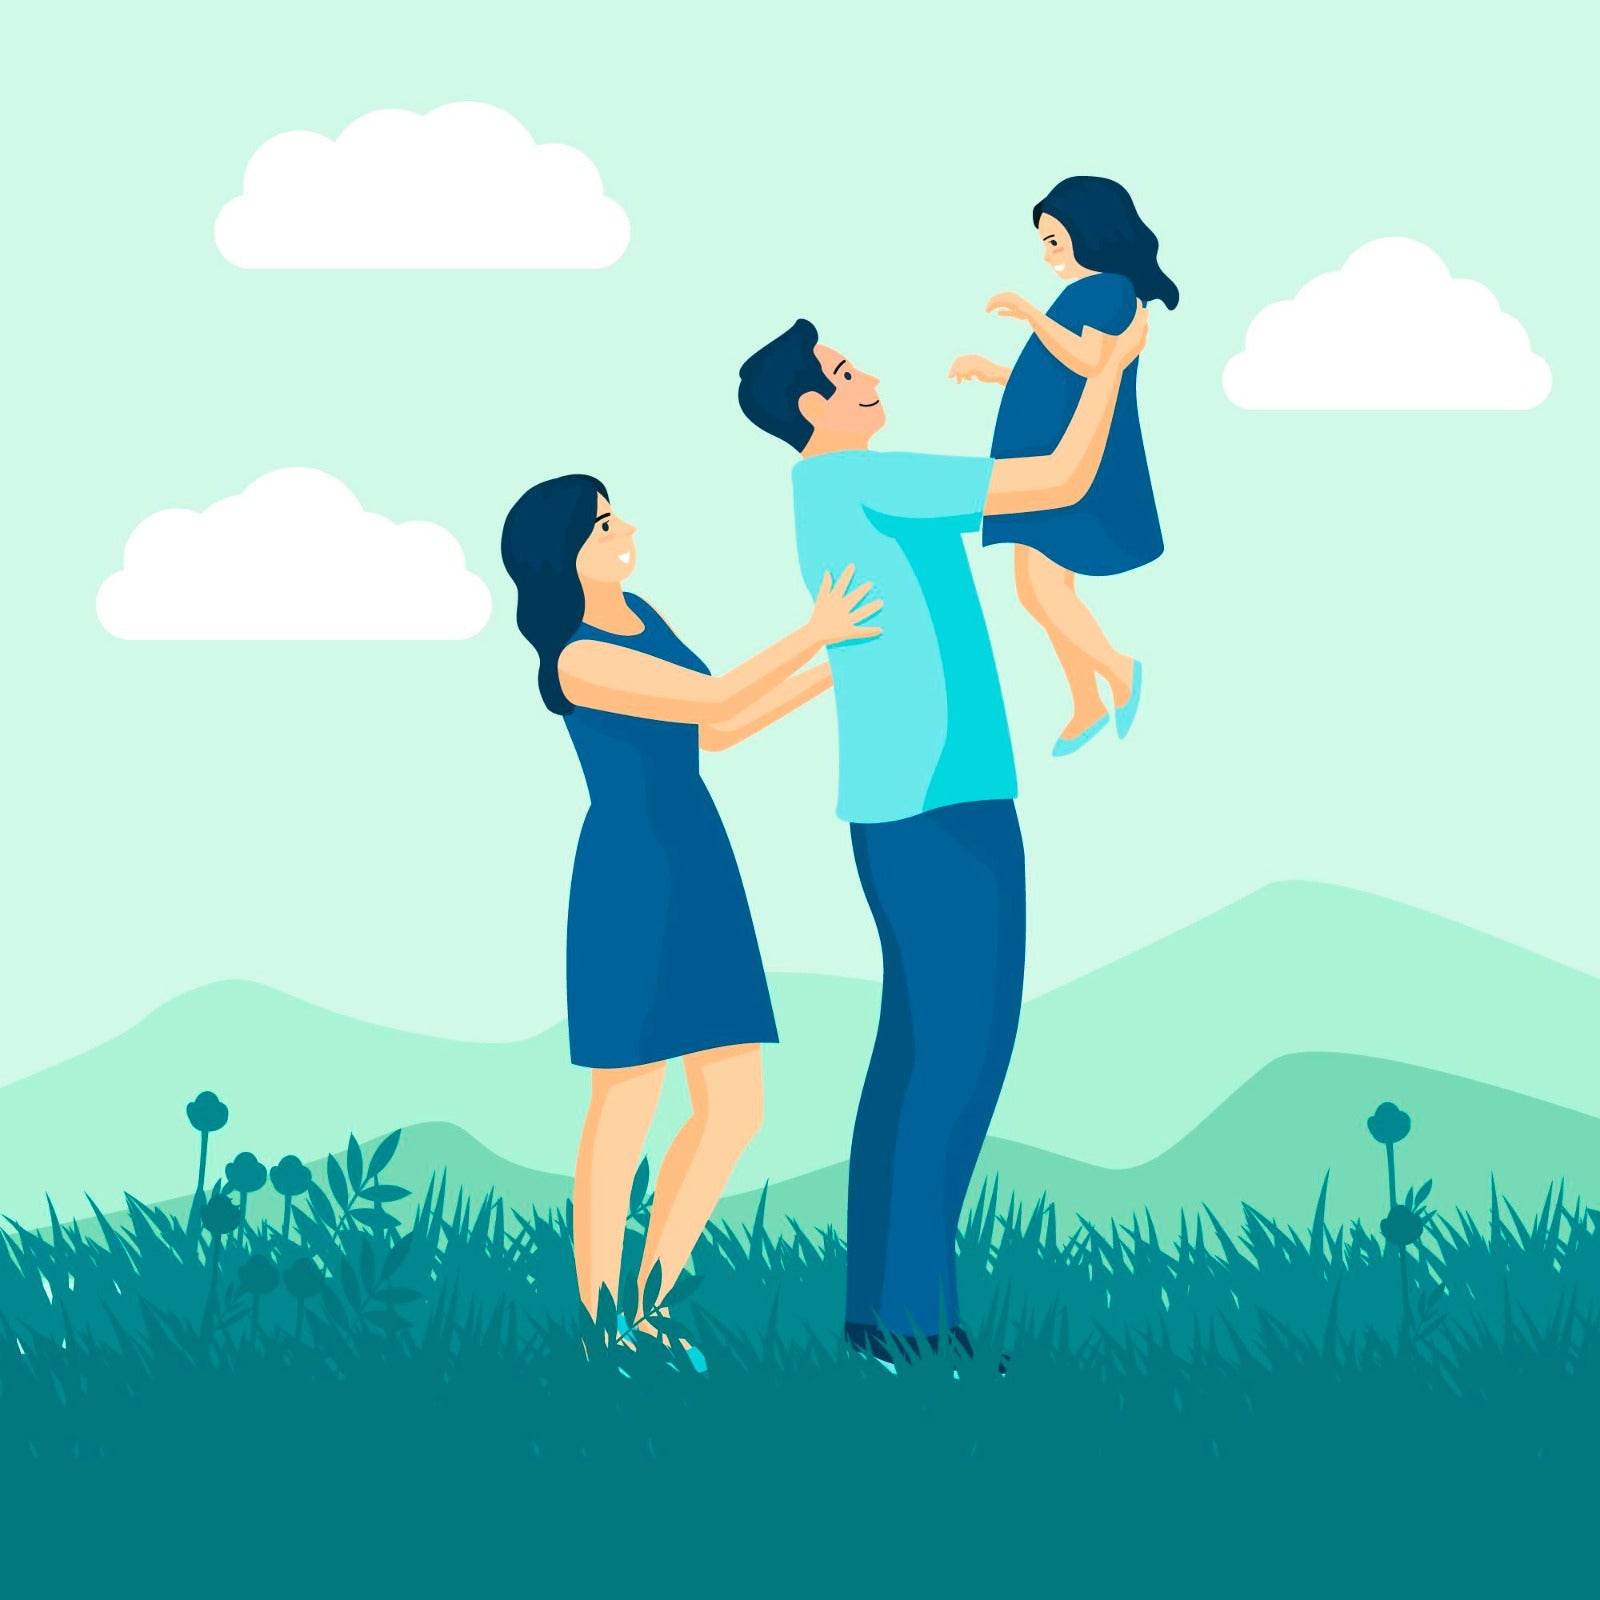 Parenting tips: 10 parenting suggestions for better parenting